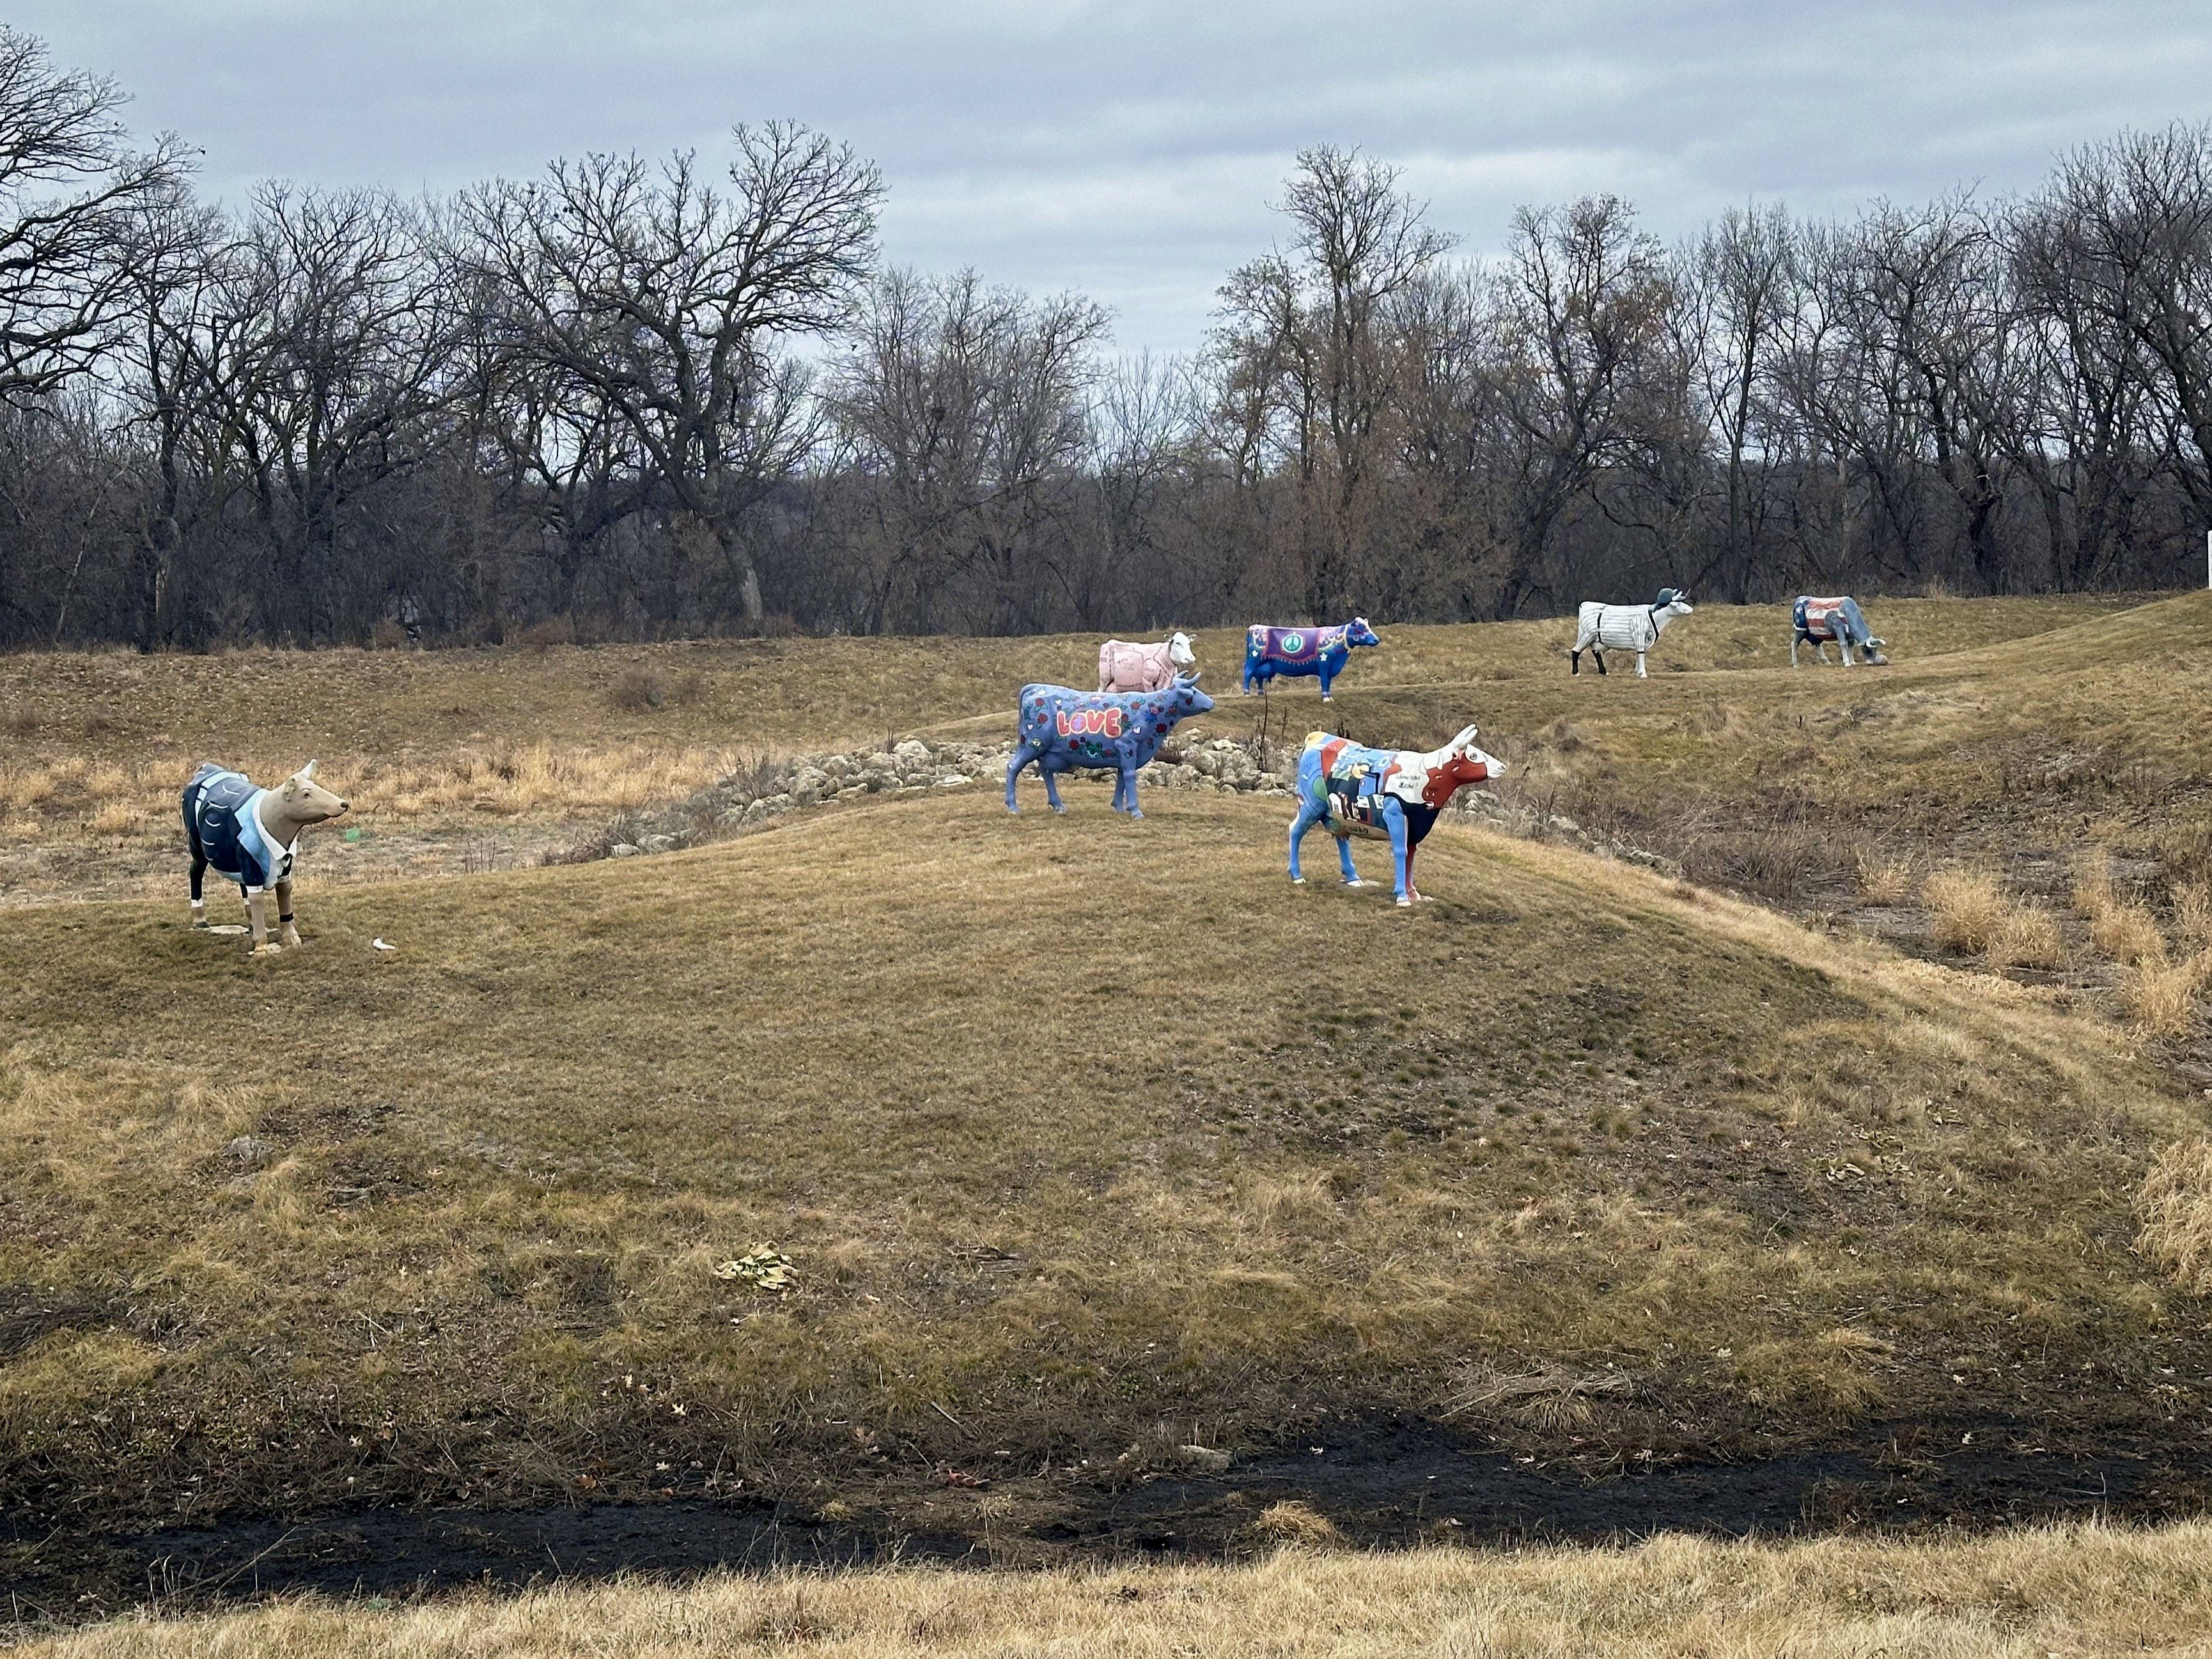 Colorfully painted cow statues are positioned on a grassy hill with bare trees in the background.